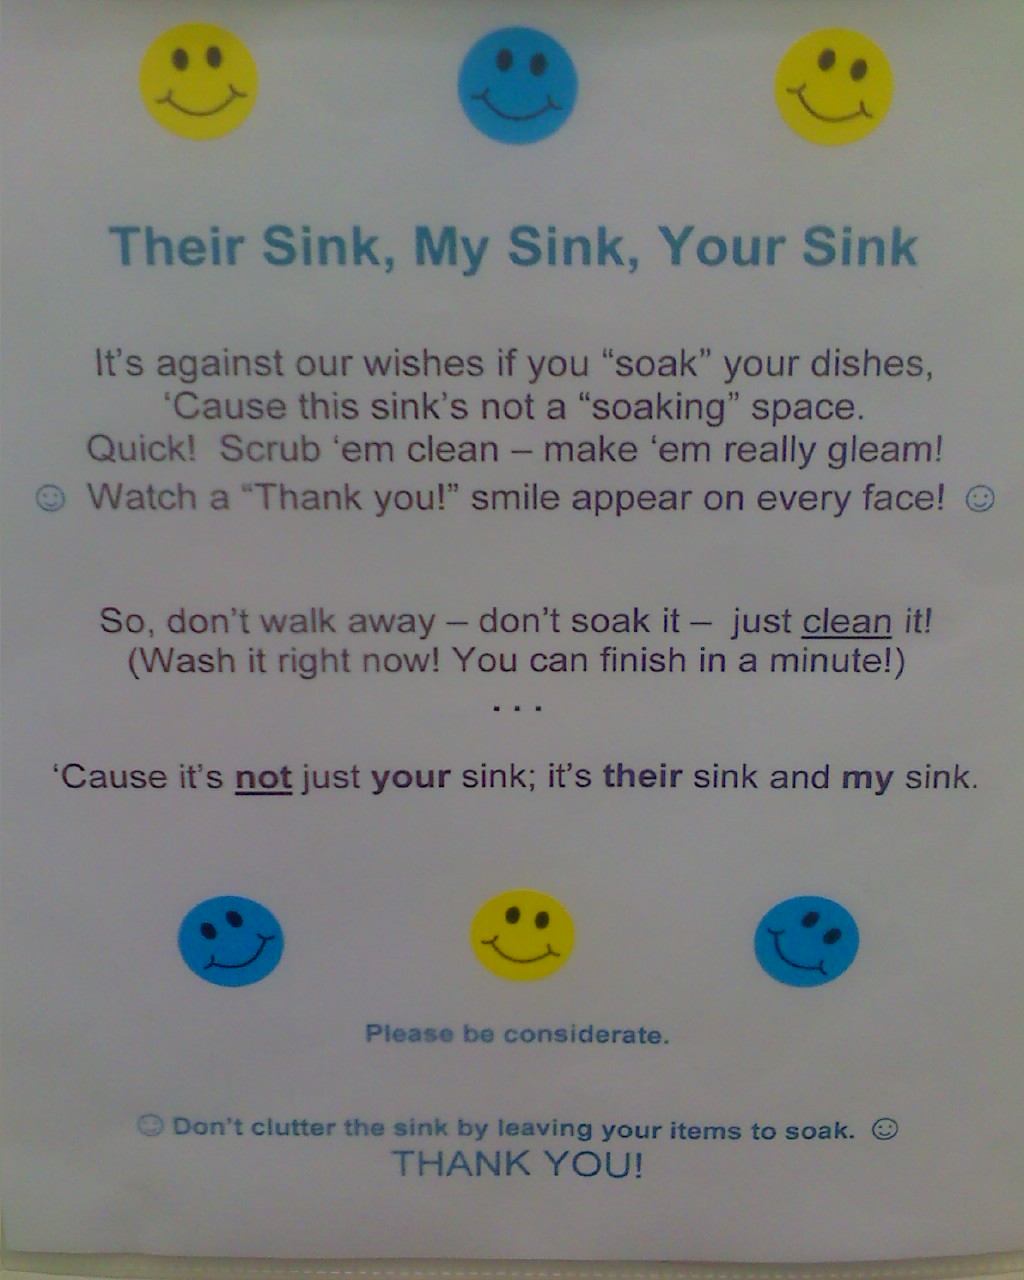 Their Sink, My Sink, Your Sink It's against our wishes if you soak your dishes cause the sink's not a soaking place. Quick! Scrub 'em clean-make 'em really gleam. Watch a 'thank you!' smile appear on every face. So don't walk away- don't soak it- just clean it! (Wash it right now! You can finish in a minute!) Cause it's not just your sink, it's their sink and my sink. Please be considerate.  Don't clutter the sink by leaving your items to soak. THANK YOU!